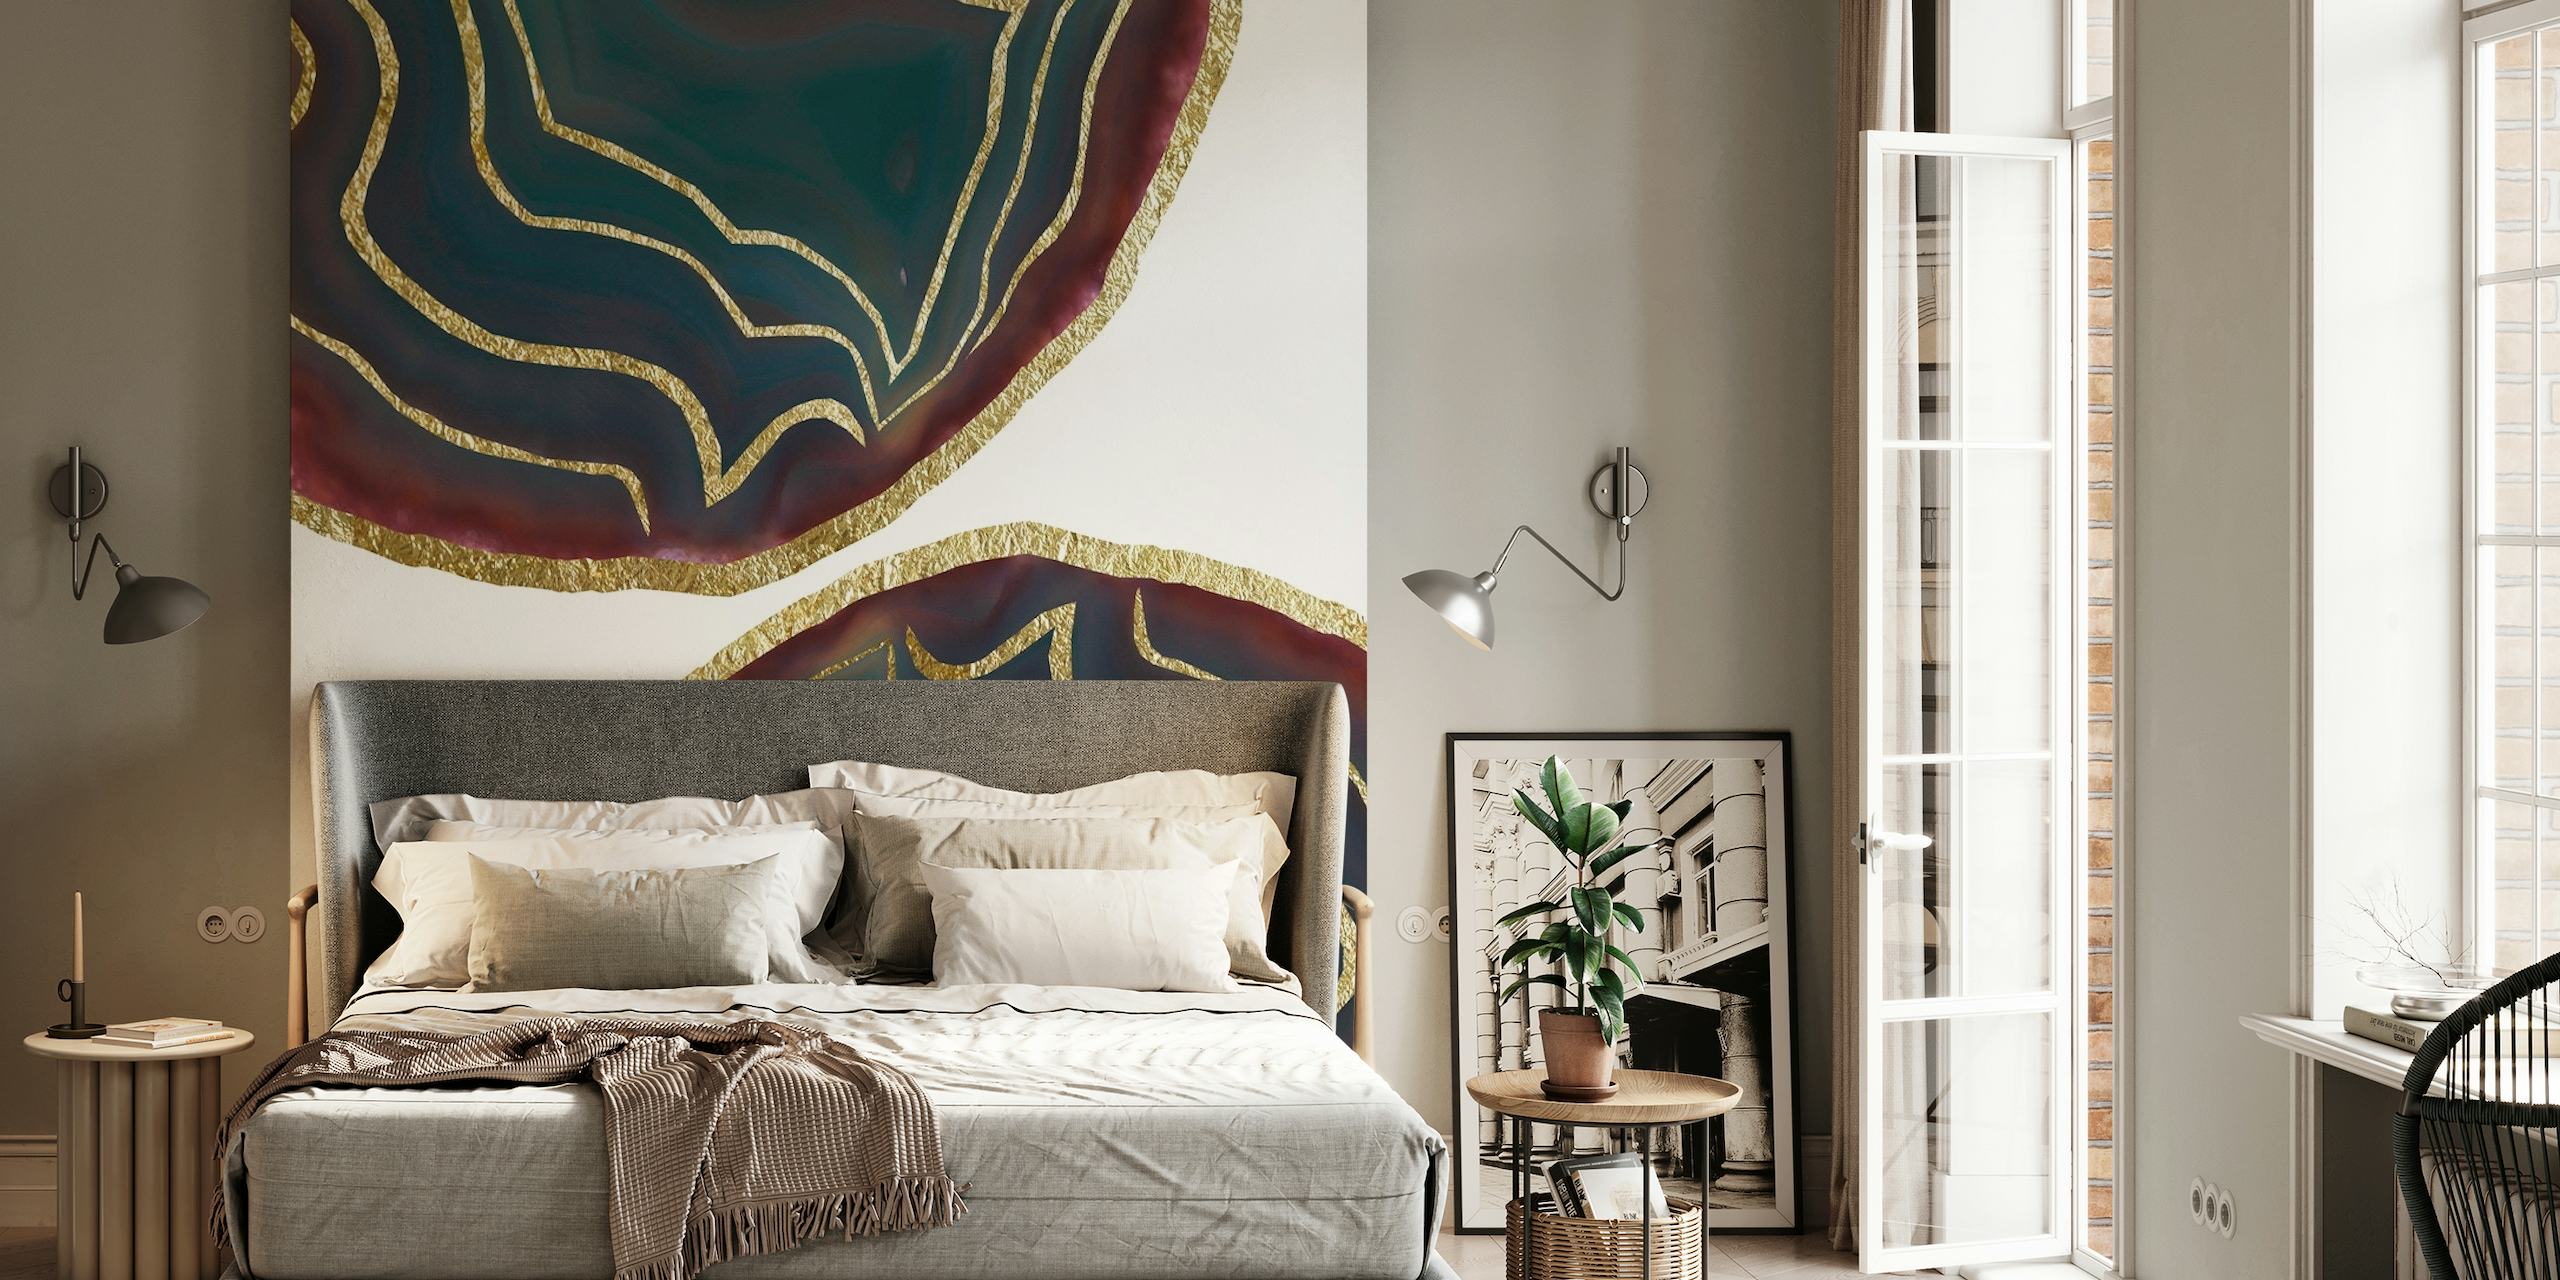 Teal and red agate pattern with gold accents wall mural